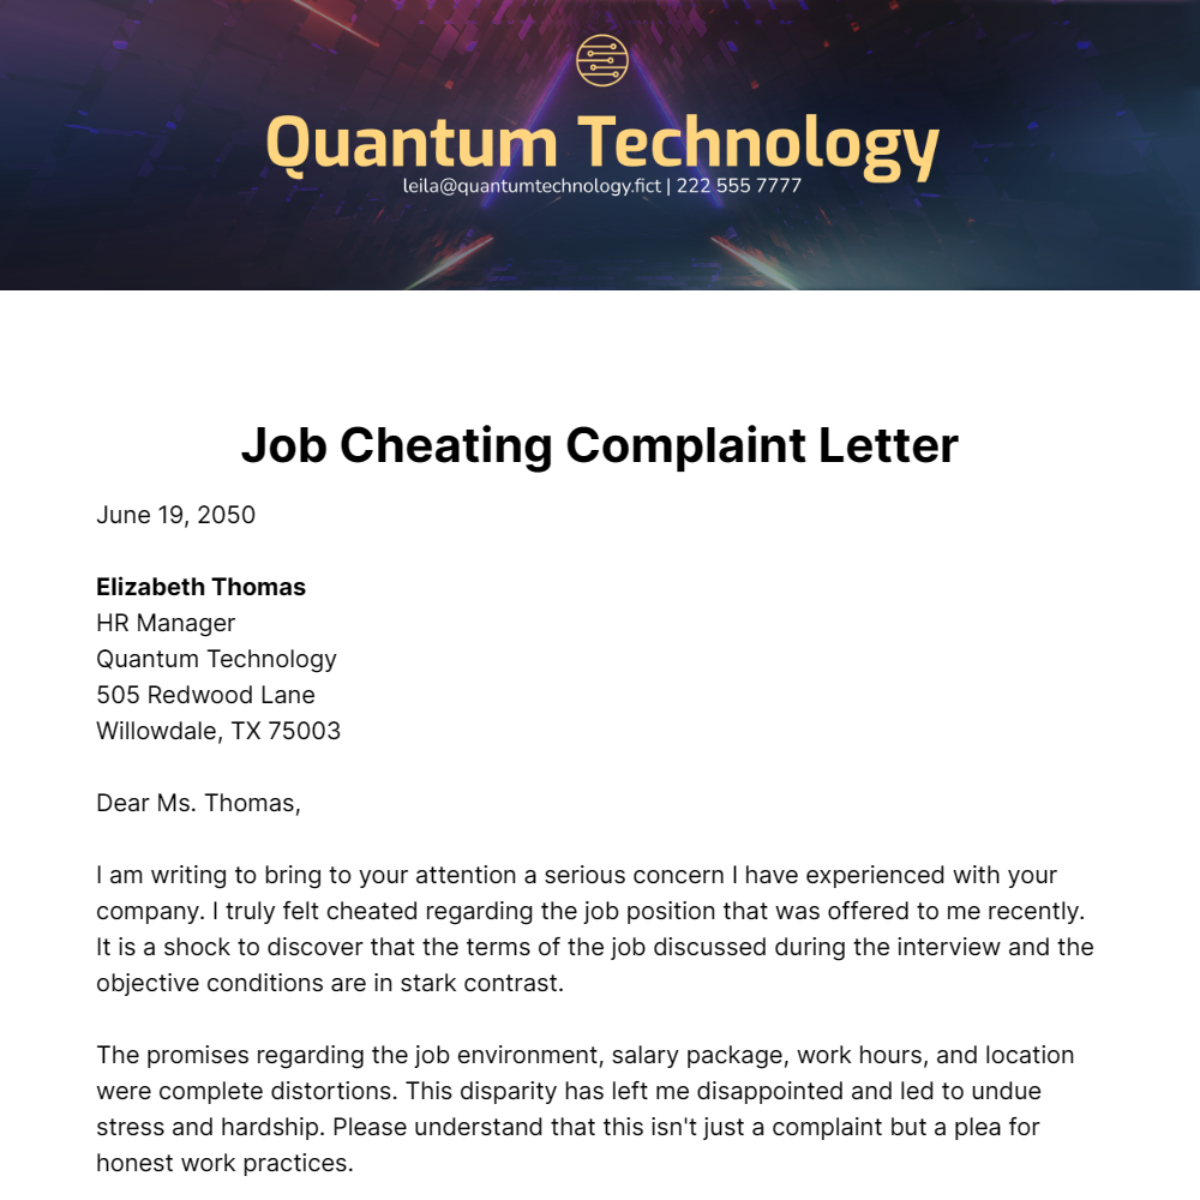 Job Cheating Complaint Letter Template